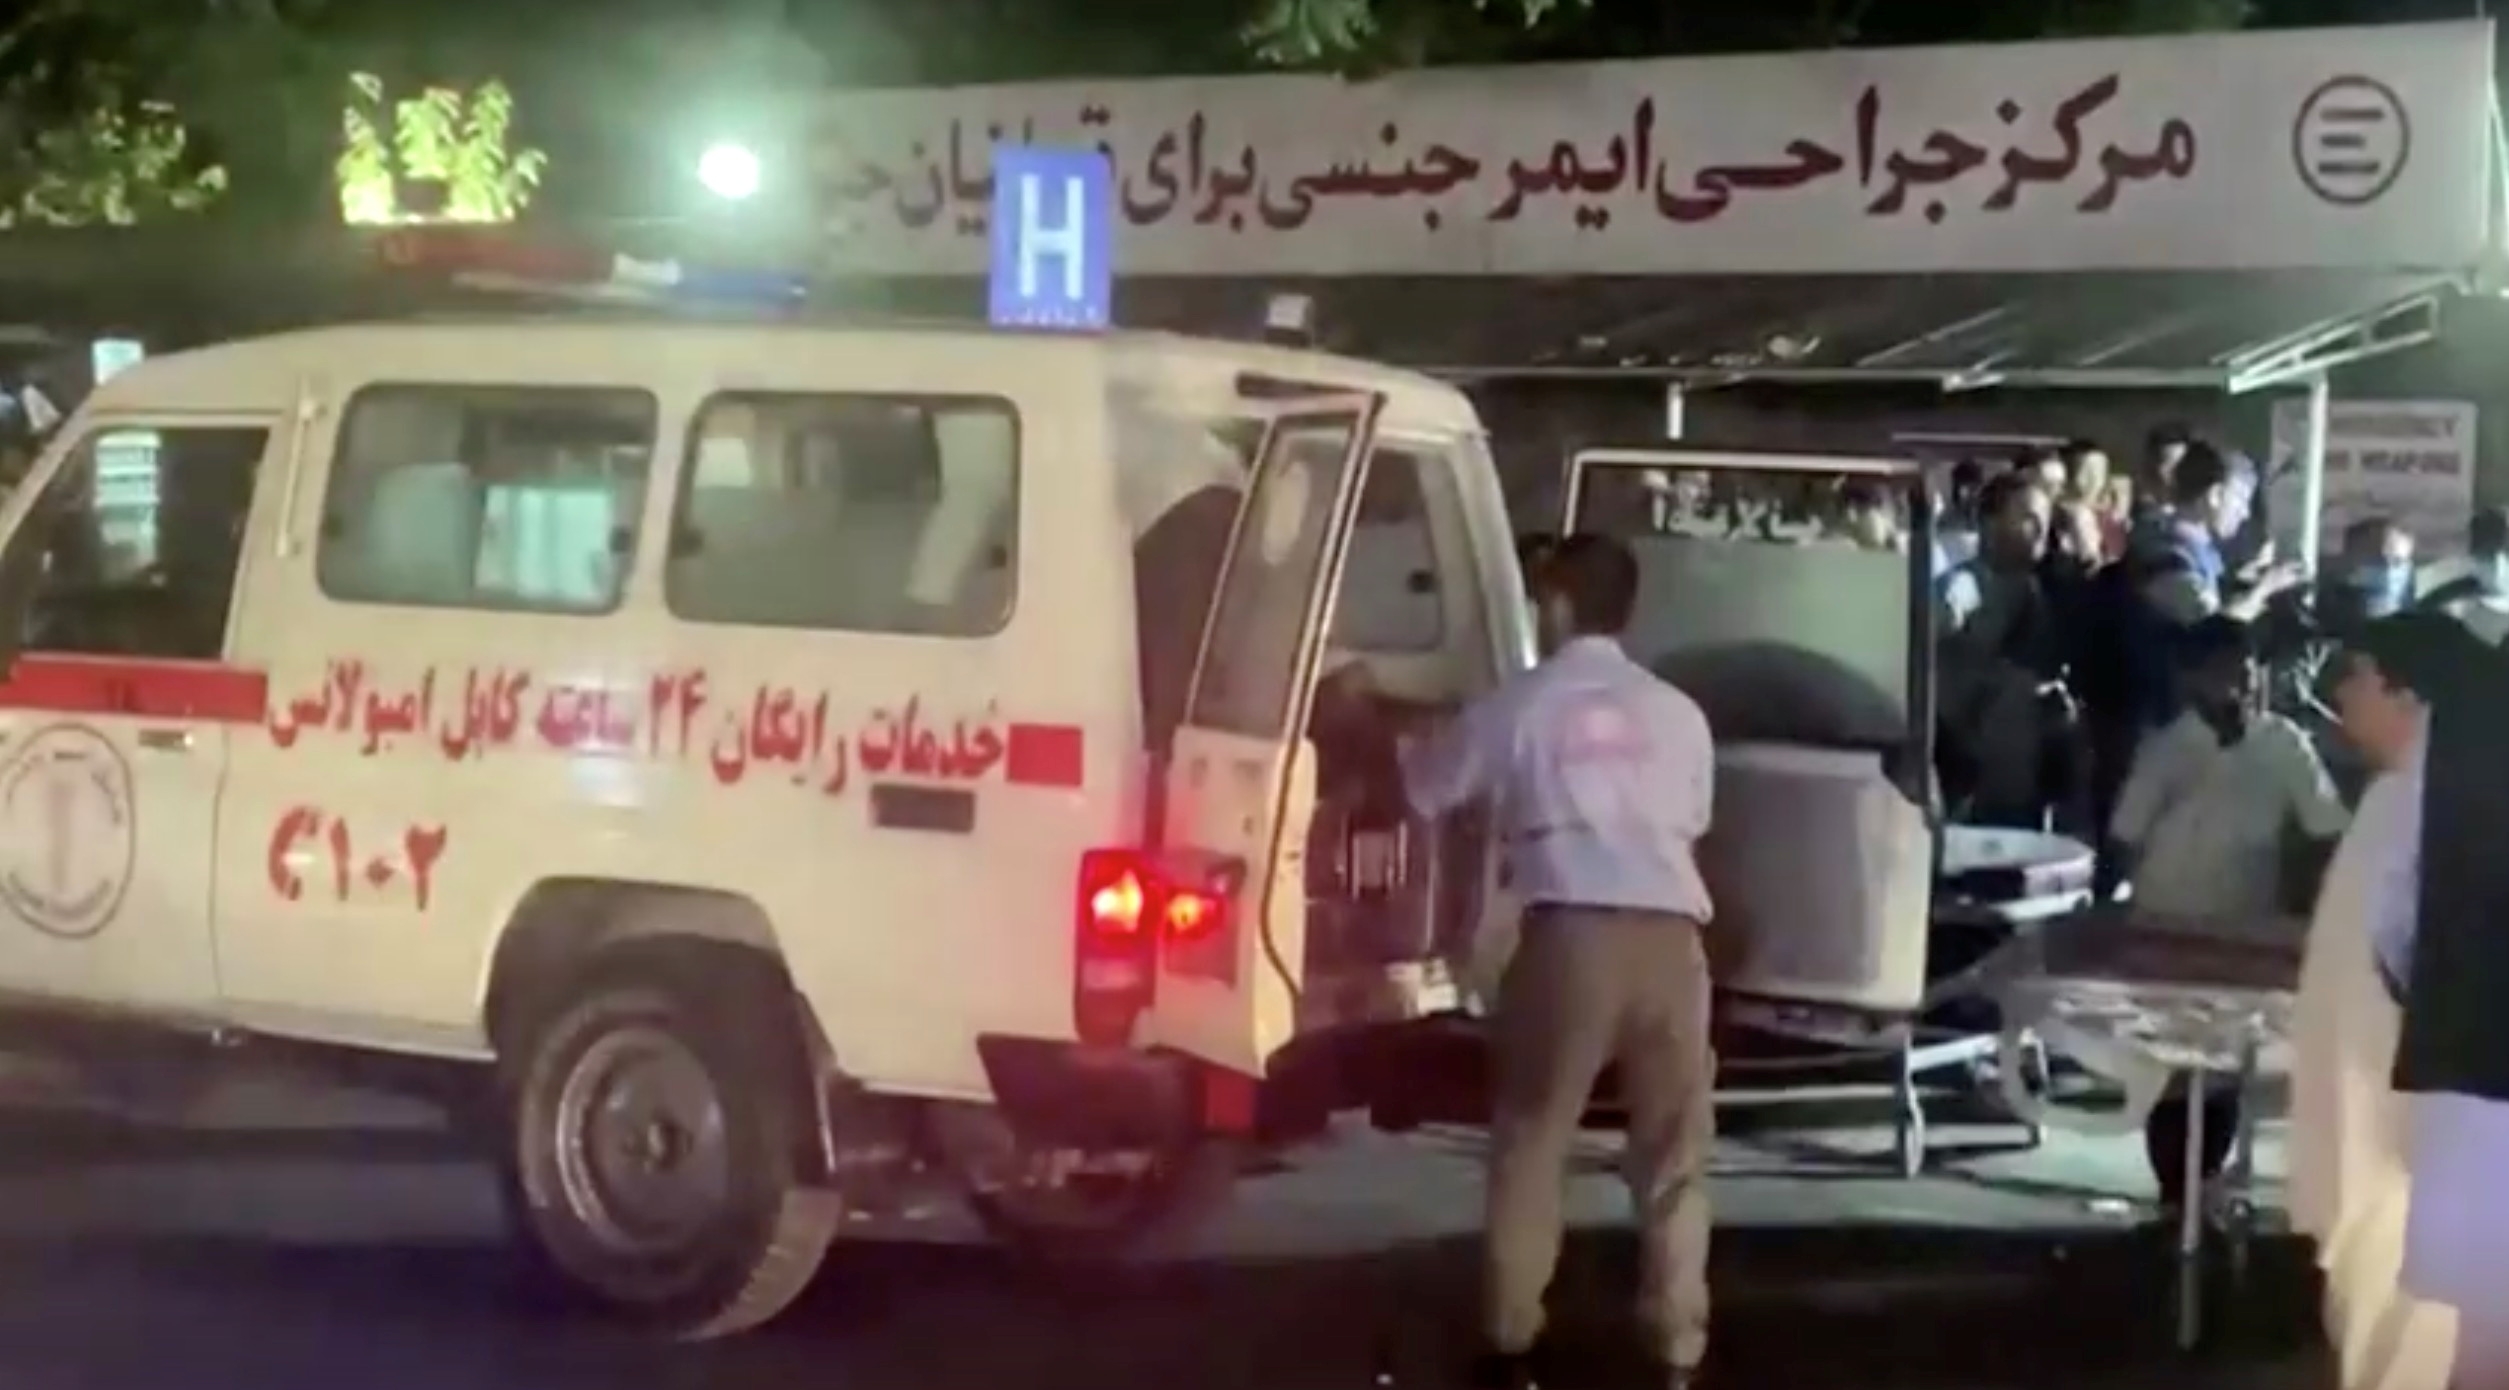 A screen grab shows an emergency vehicle as people arrive at a hospital after an attack at Kabul airport in Afghanistan on 26 August 2021.